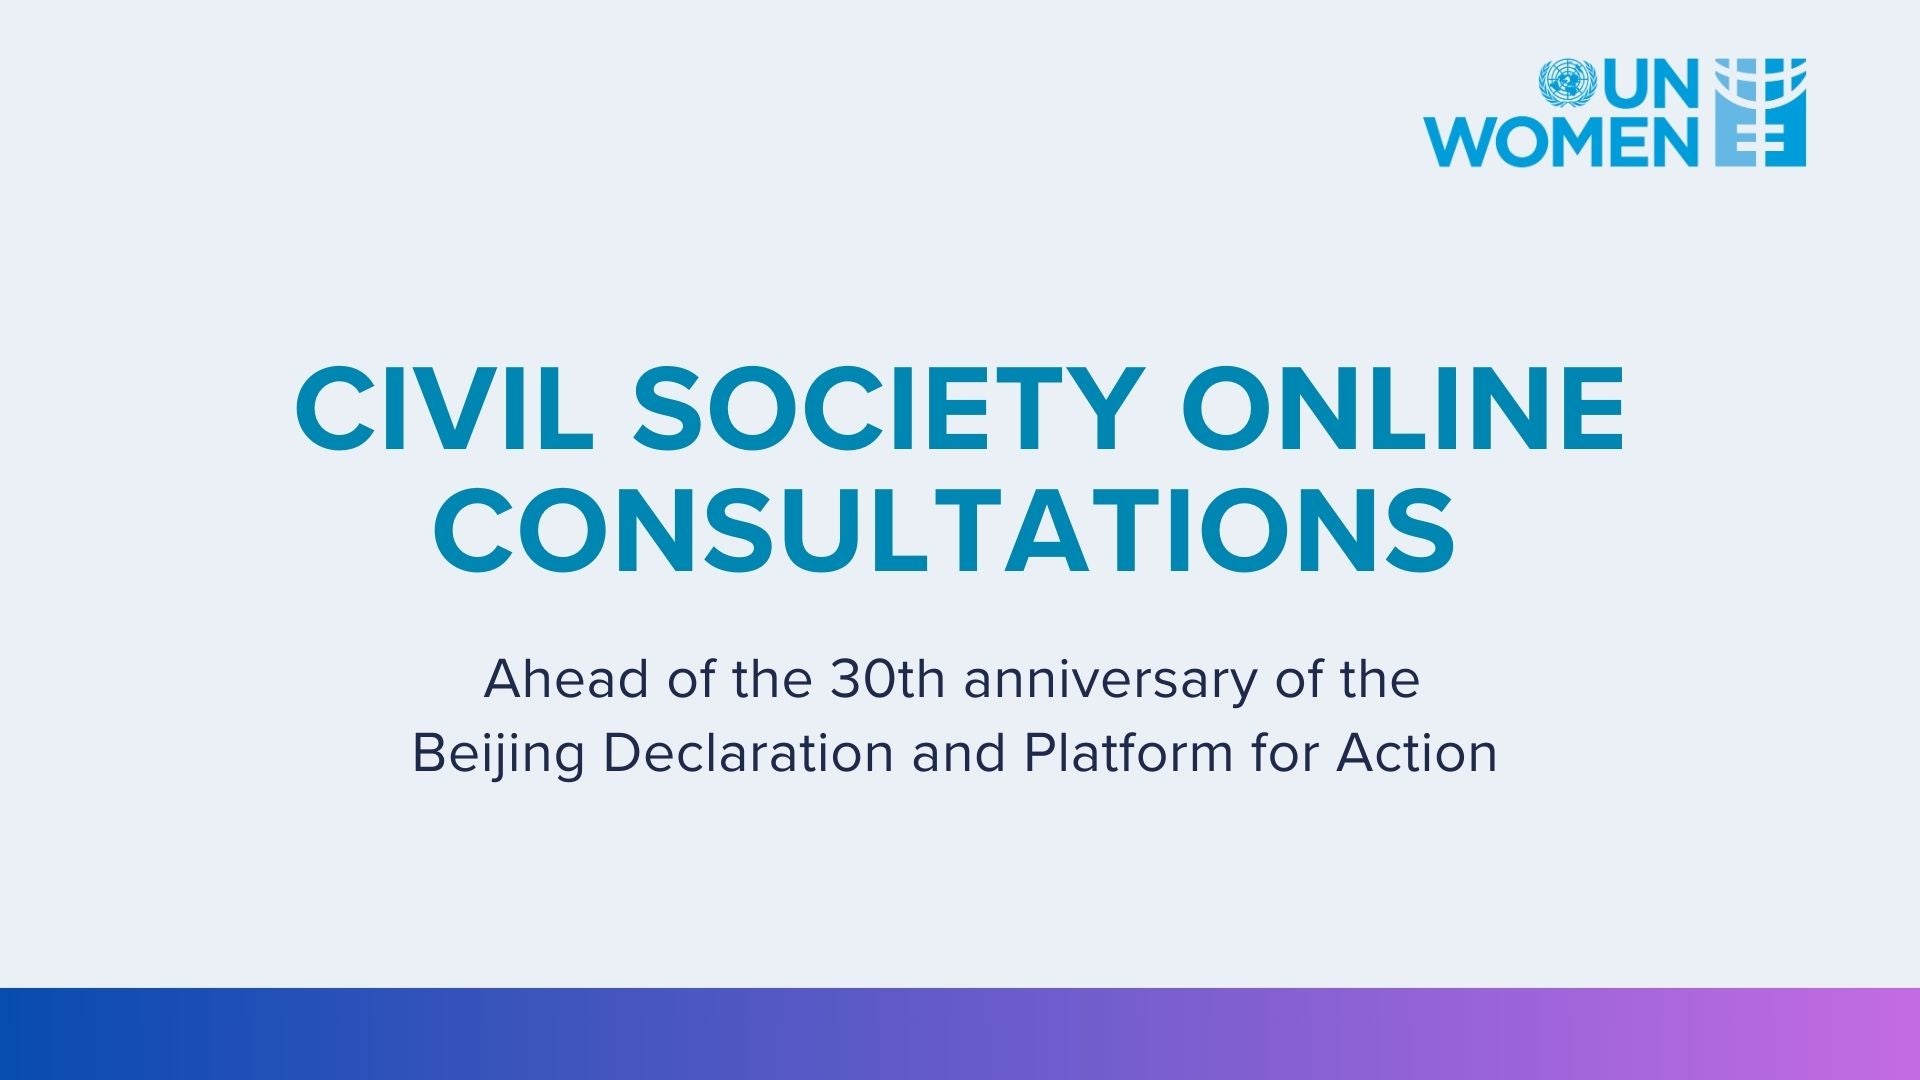 Civil society consultation ahead of the 30th anniversary of the Beijing Declaration and Platform for Action 